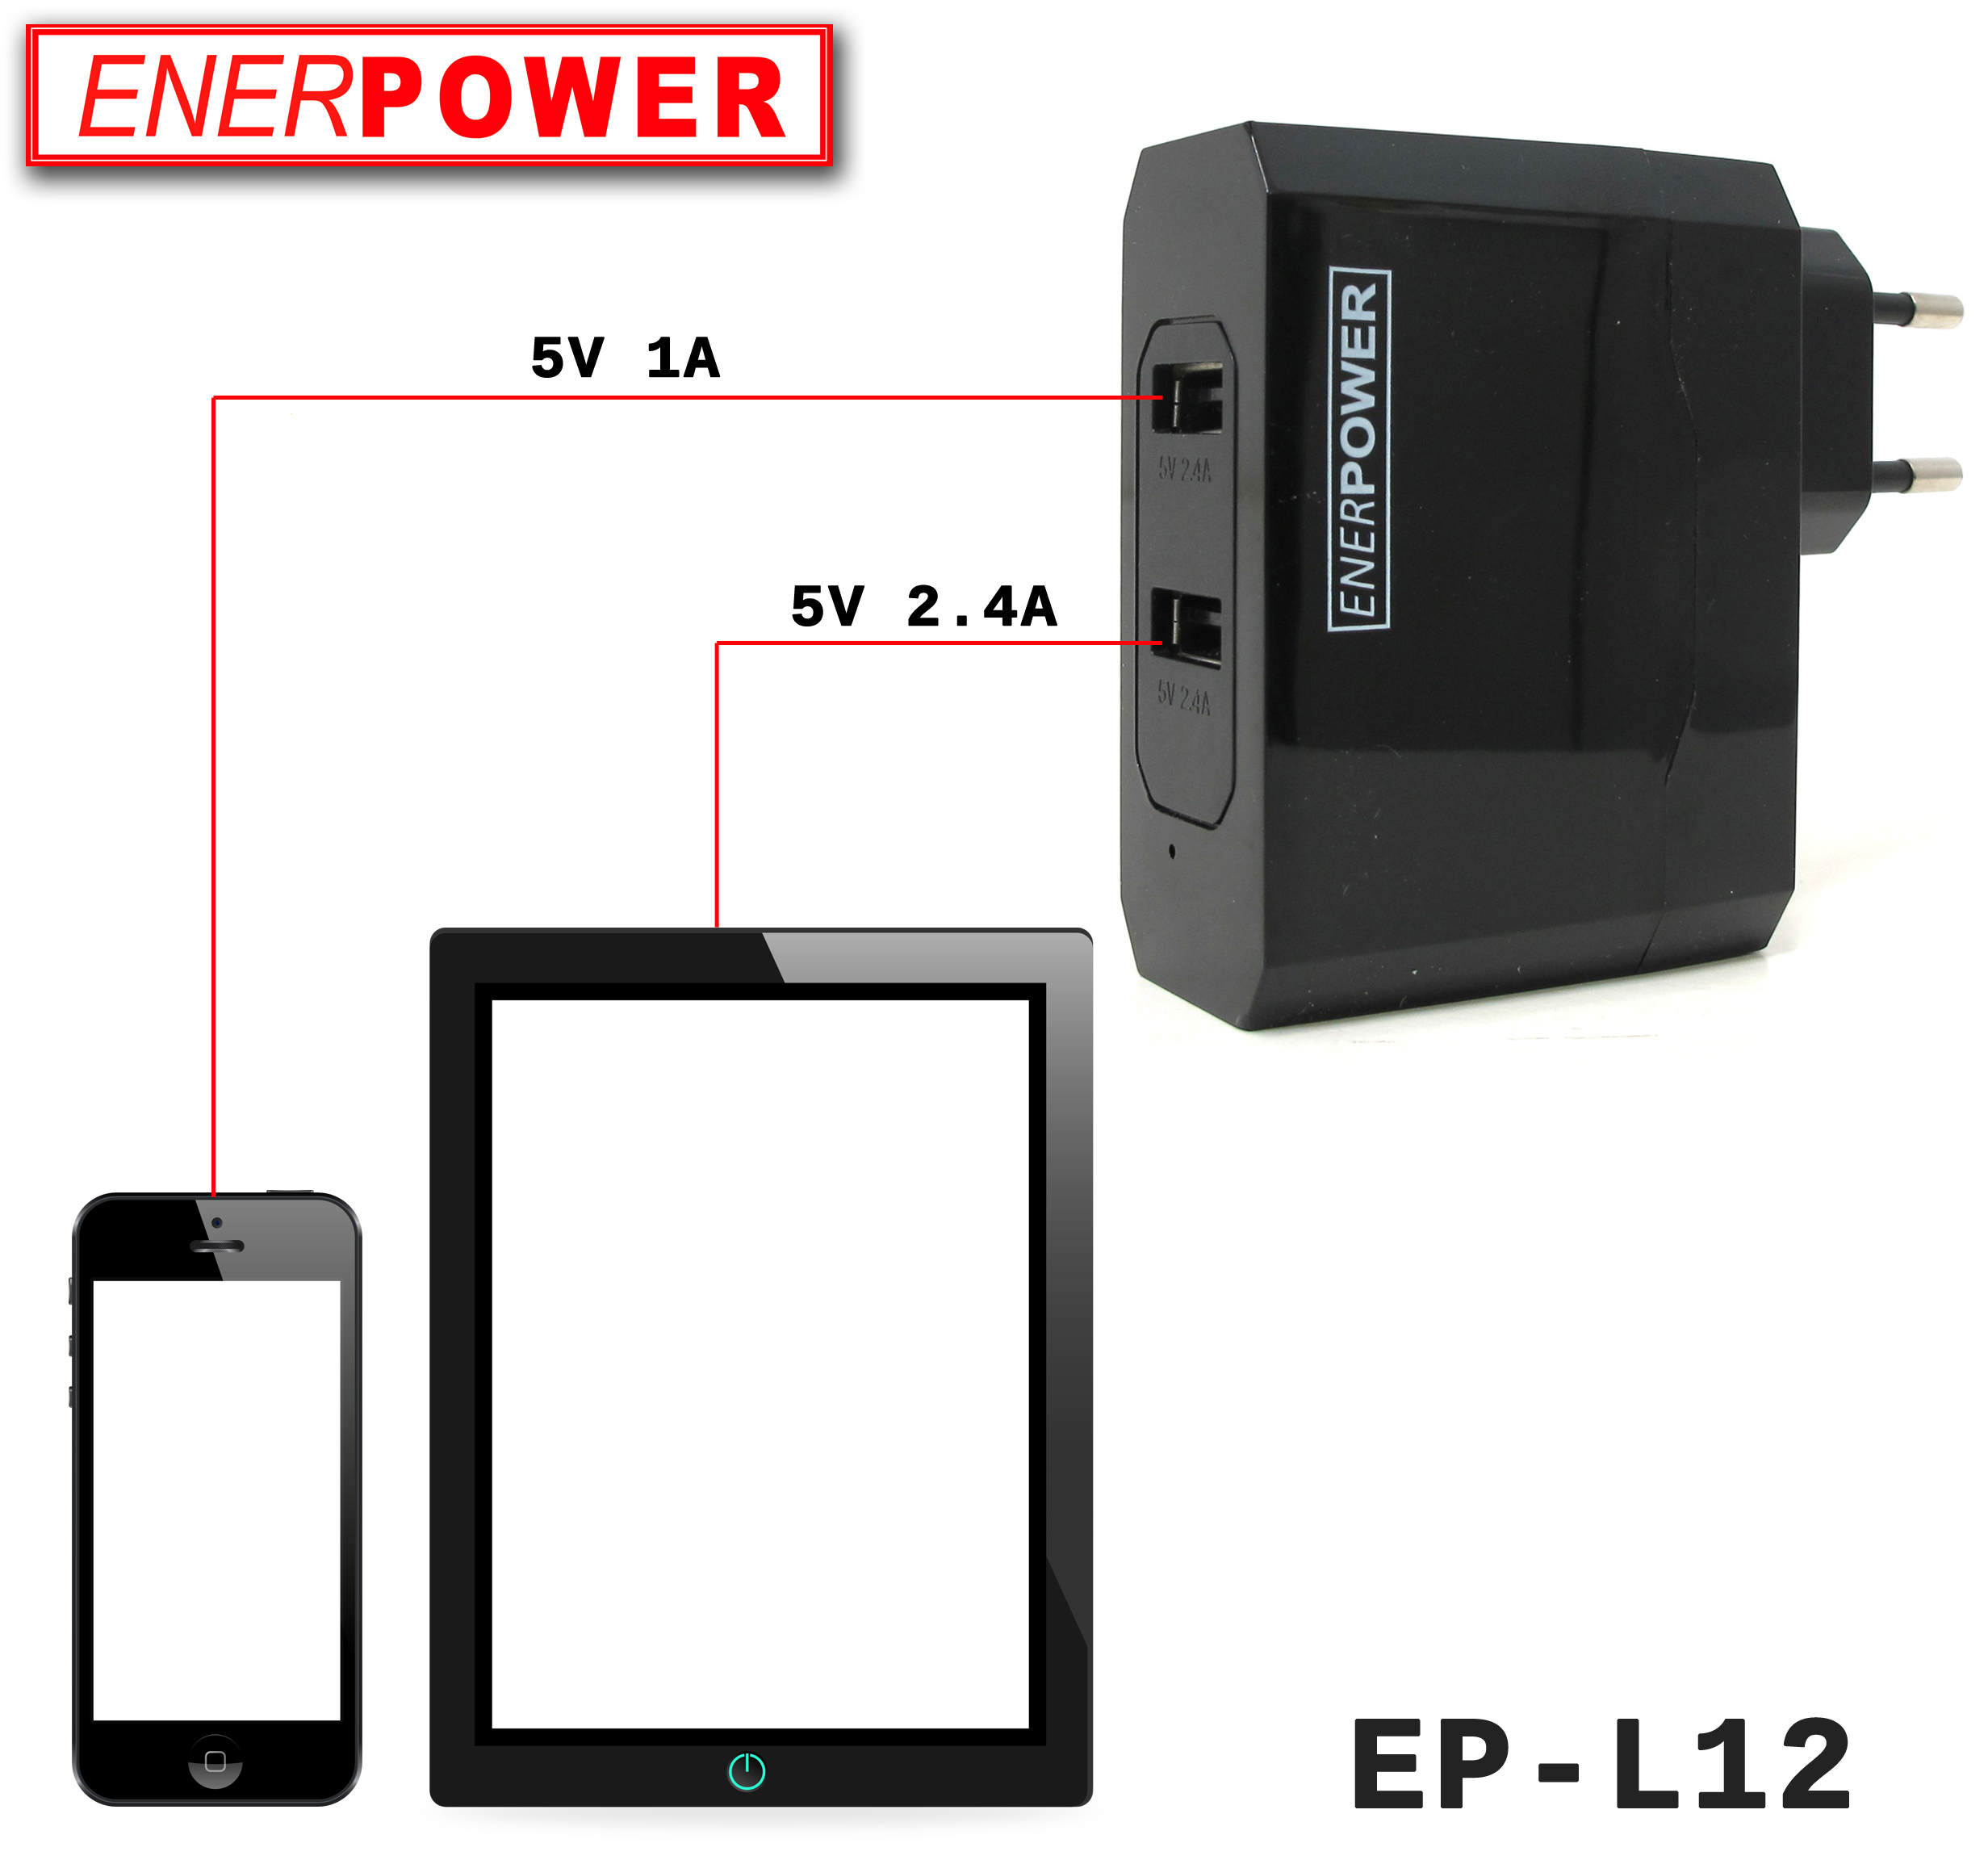 ENERpower EP-L12 Universal Dual 5V Power Supply USB Charger (2.4A / 1A)